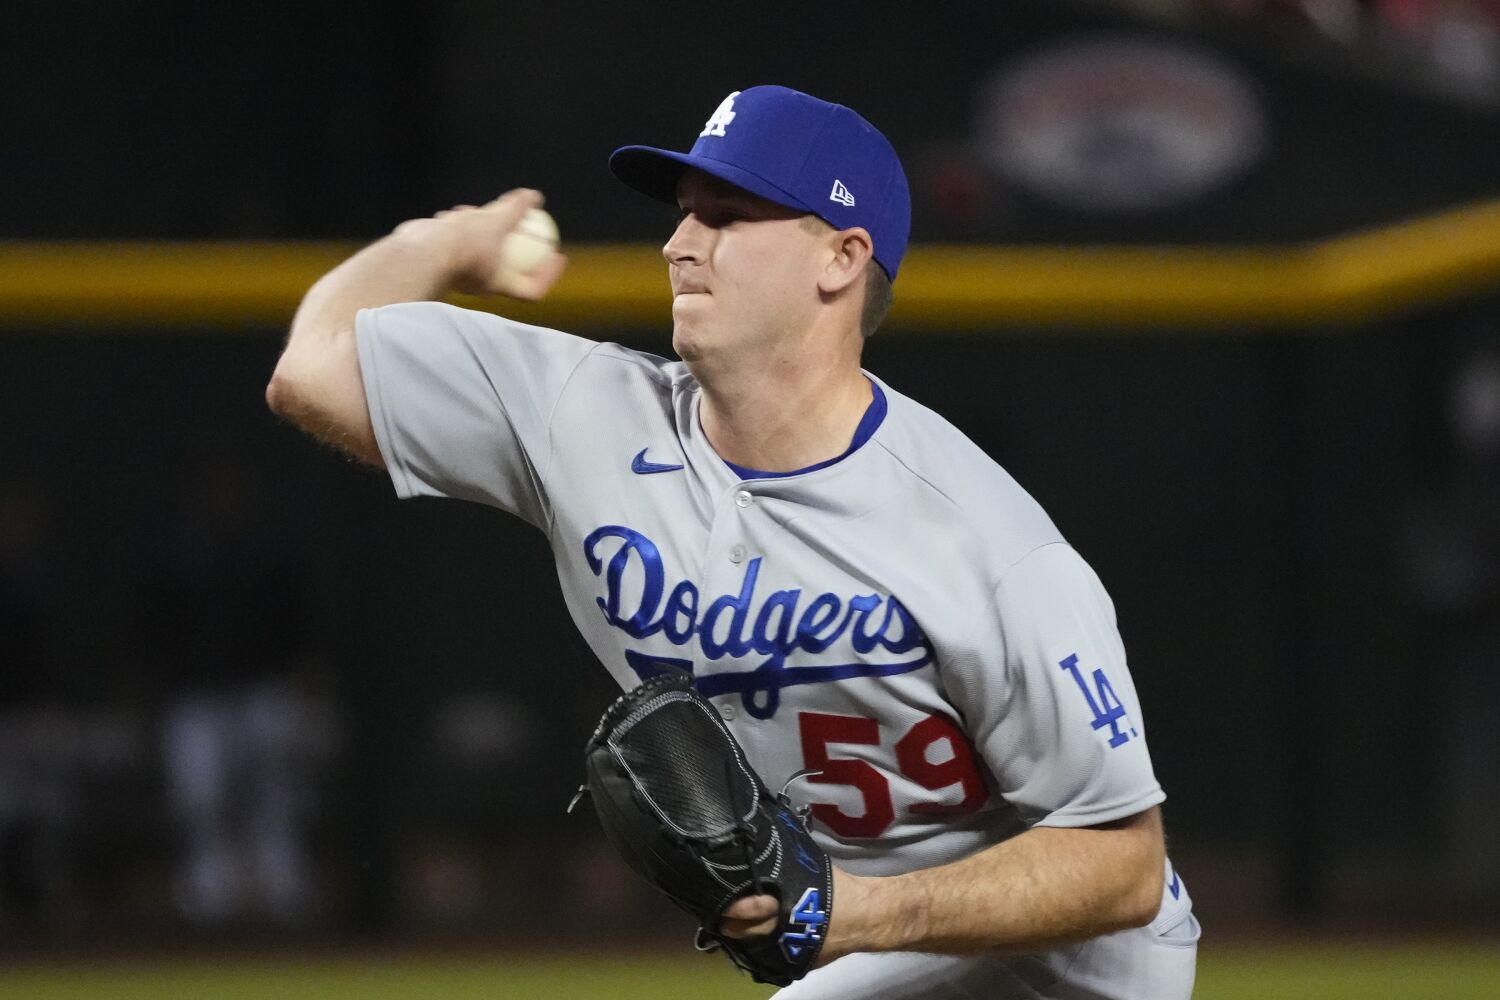 Evan can't wait: Why Evan Phillips' de facto closer role is burning the Dodgers